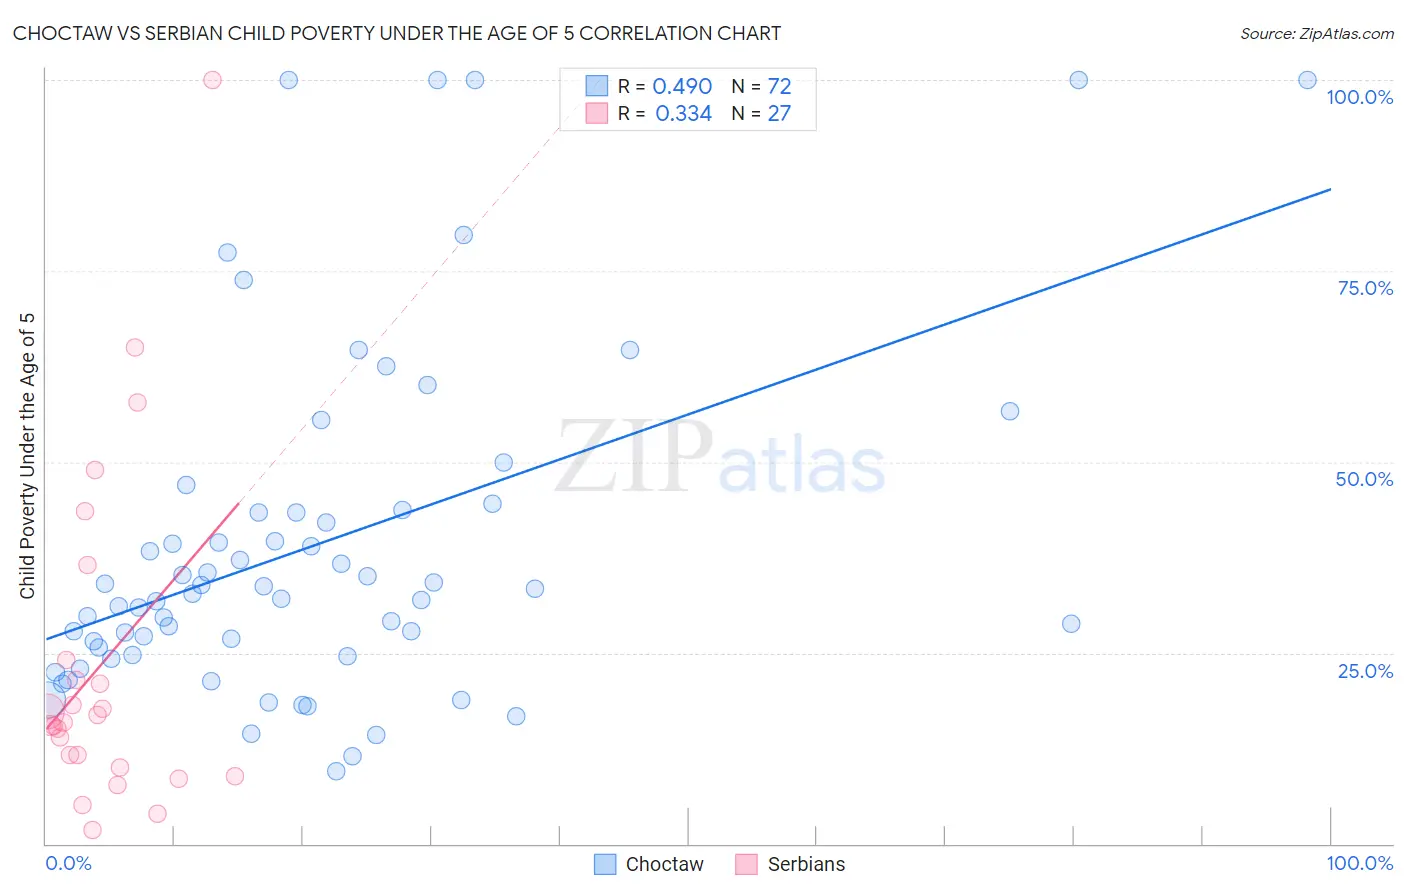 Choctaw vs Serbian Child Poverty Under the Age of 5